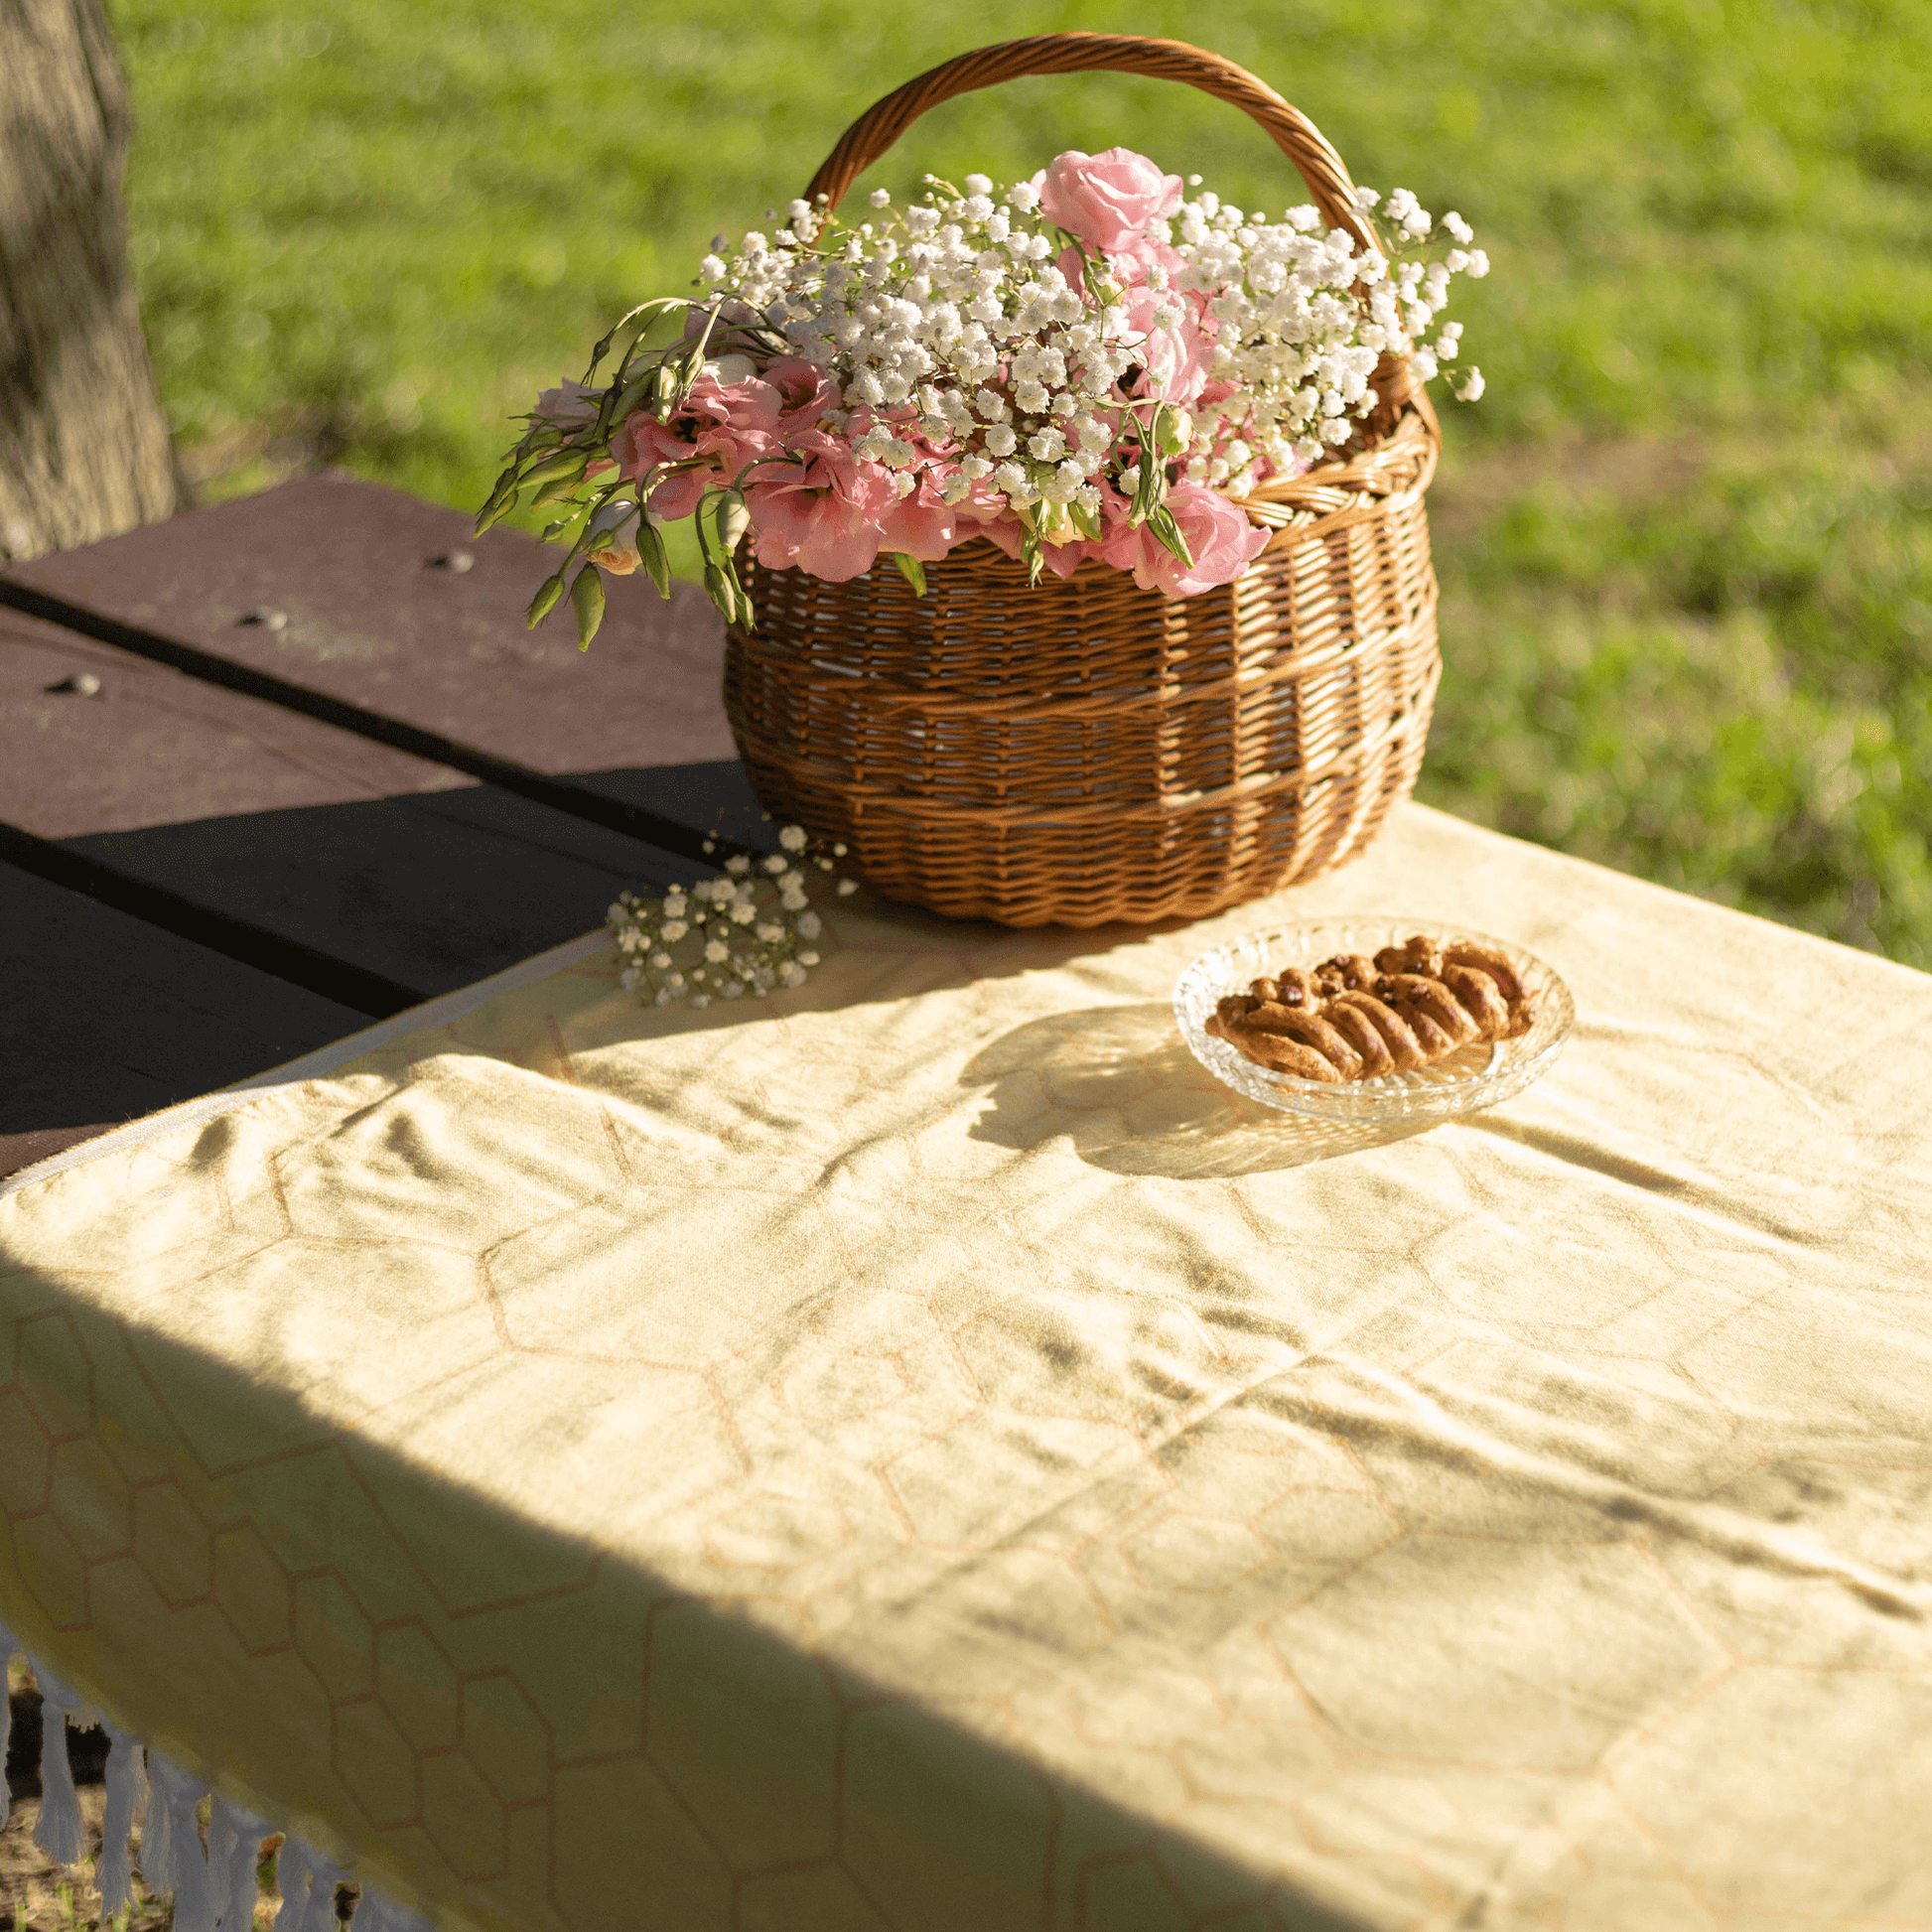 A yellow Turkish towel is used as a picnic table cloth on a summers day in the park. The table also has a basket of flowers and pastry.